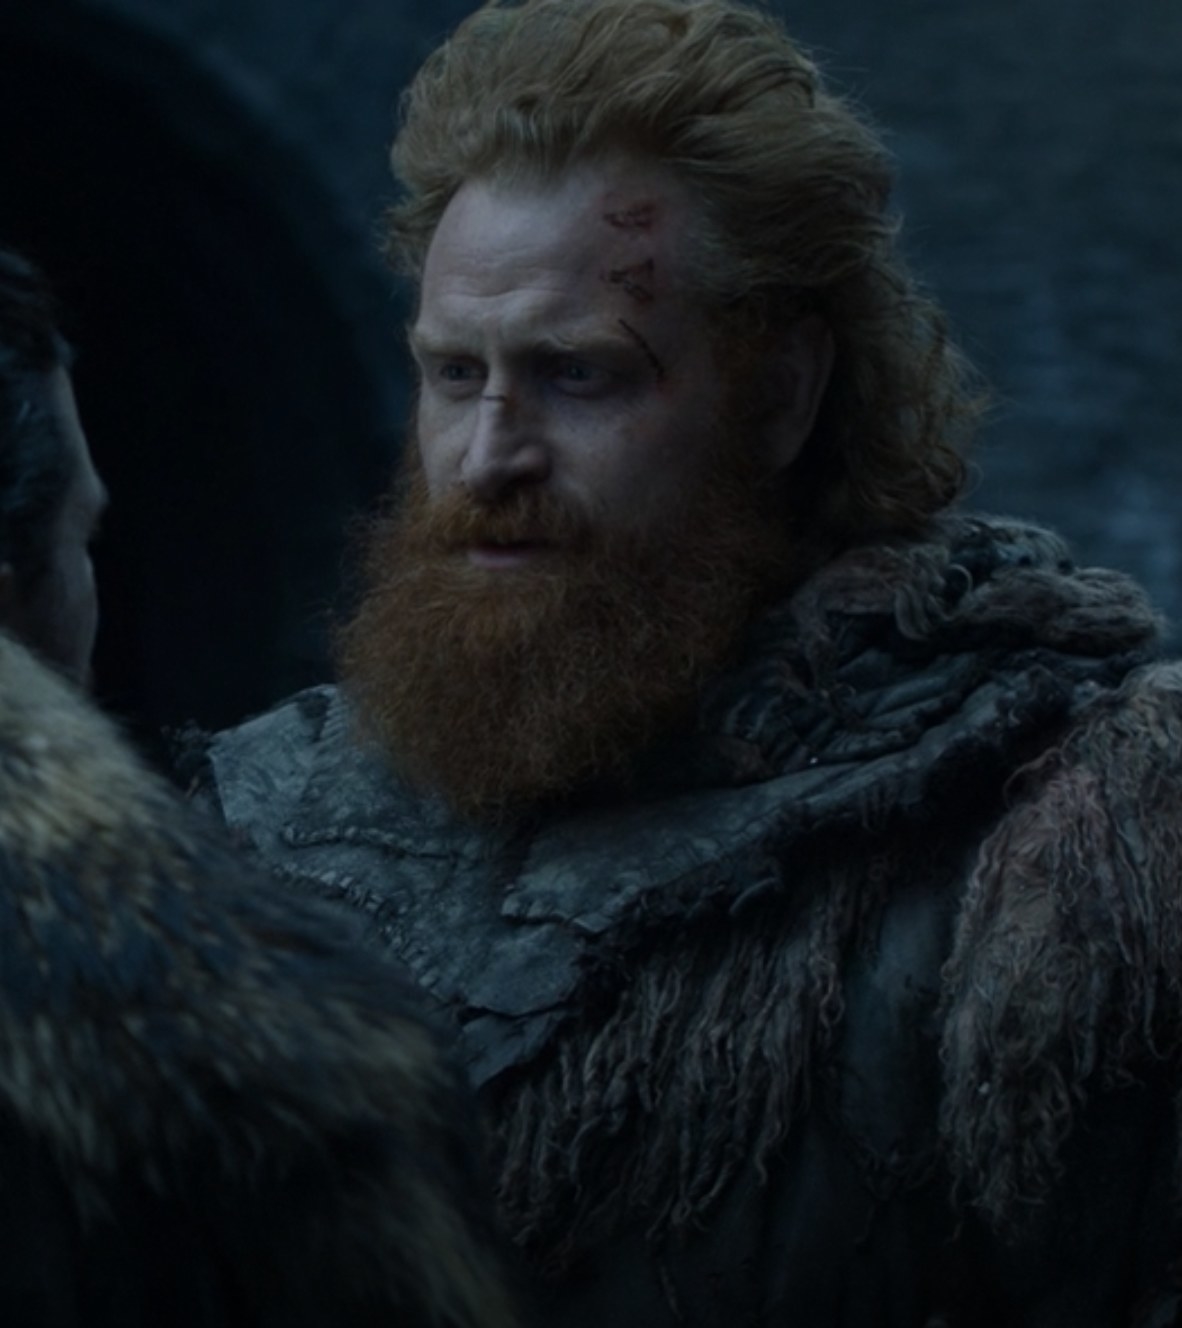 Kristofer Hivju as Tormund has a discussion with Jon Snow in Season 8, Episode 4 of &quot;Game of Thrones,&quot; &quot;The Last of the Starks&quot;